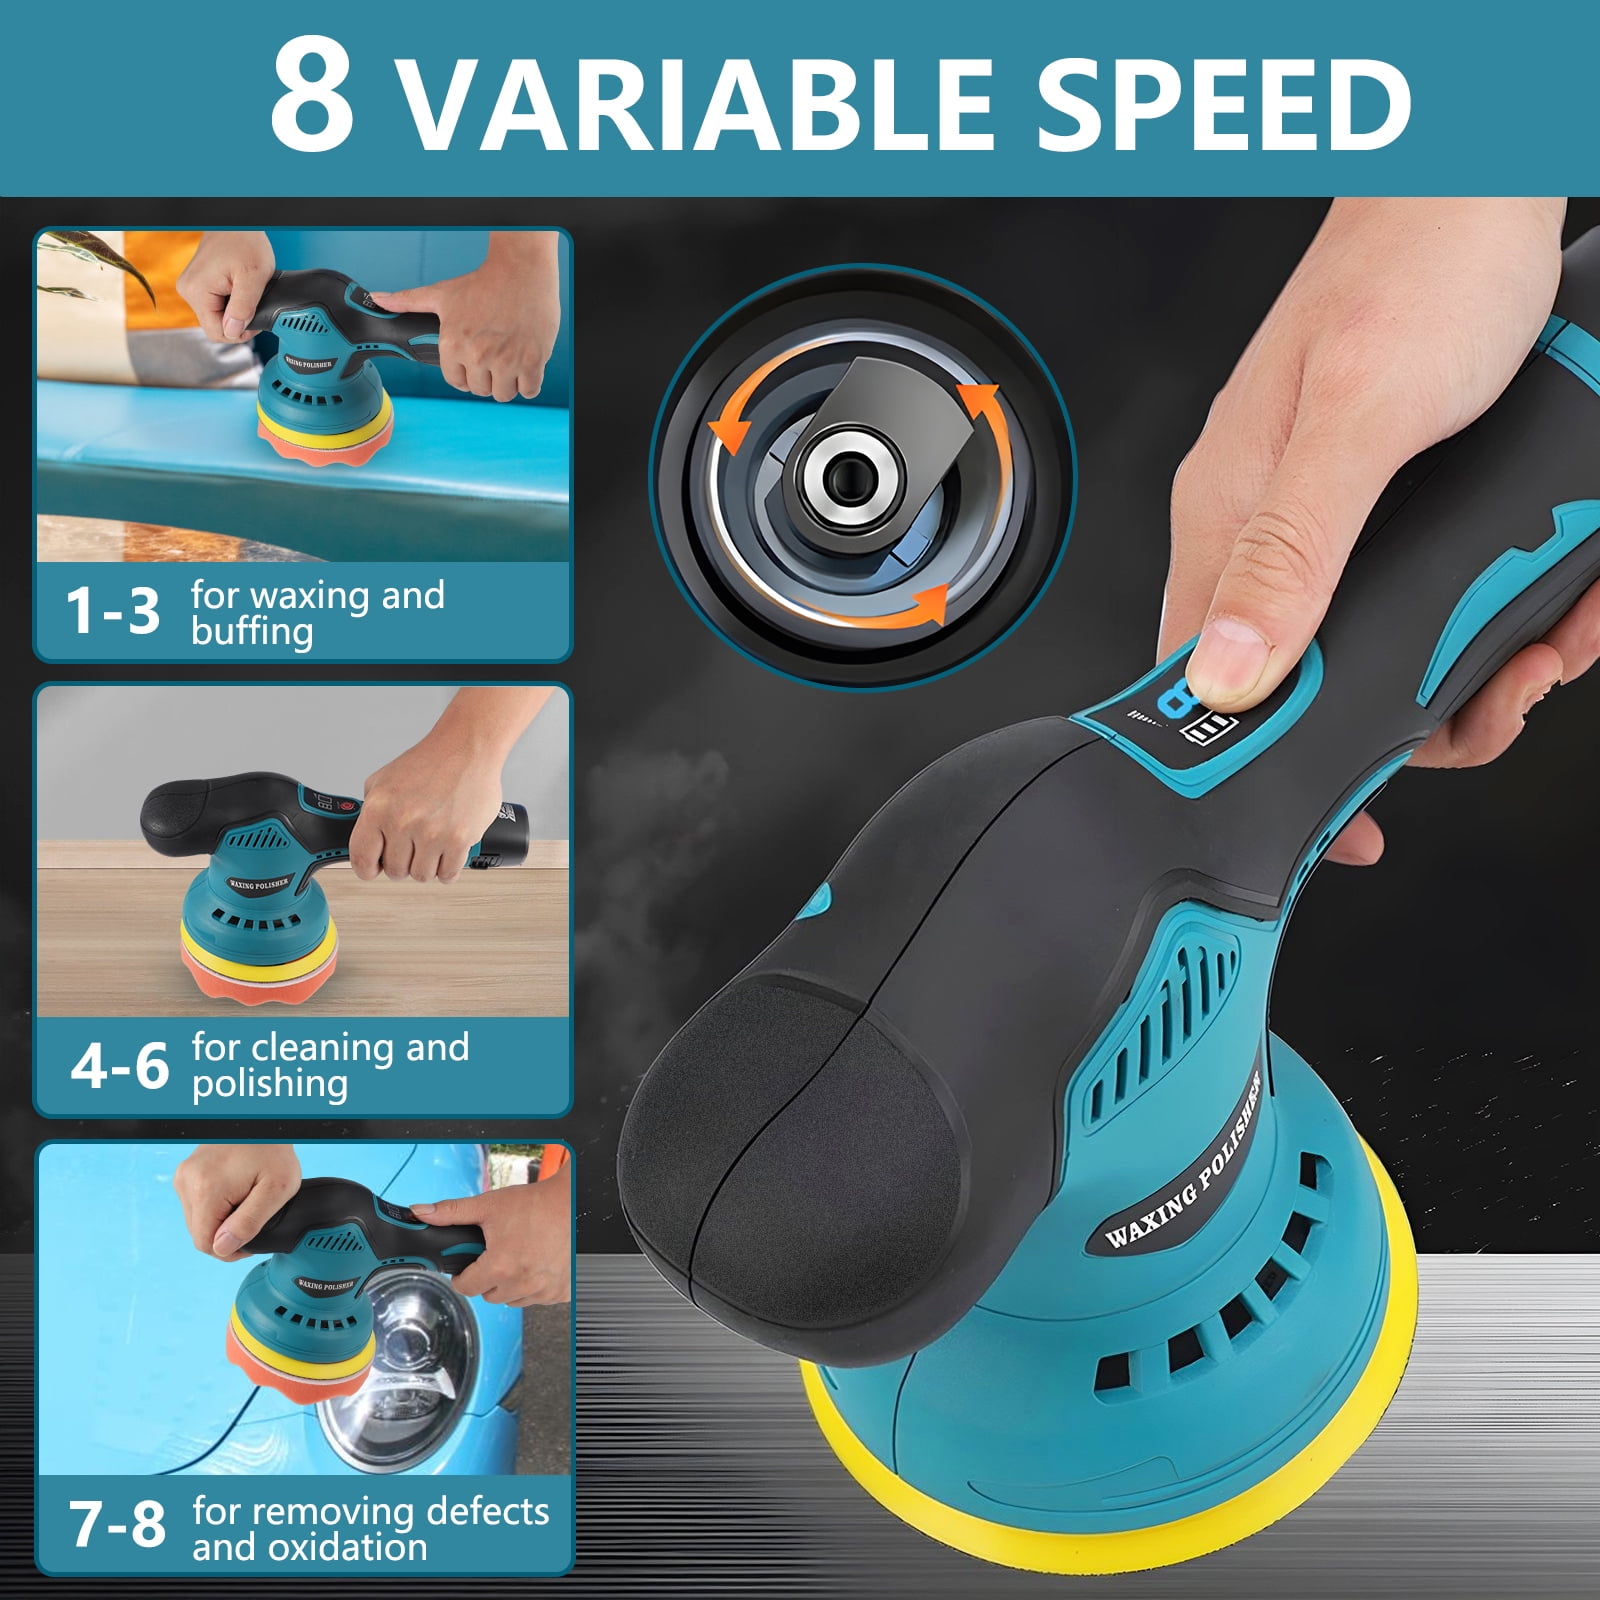 Hanru Cordless Car Buffer Polisher, Car Waxer with 2pcs 12V Lithium  Rechargeable Battery, Polisher with Variable Speed, Portable Polisher Kit, Car  Detailing Kit for Buffer/Polisher/sander 